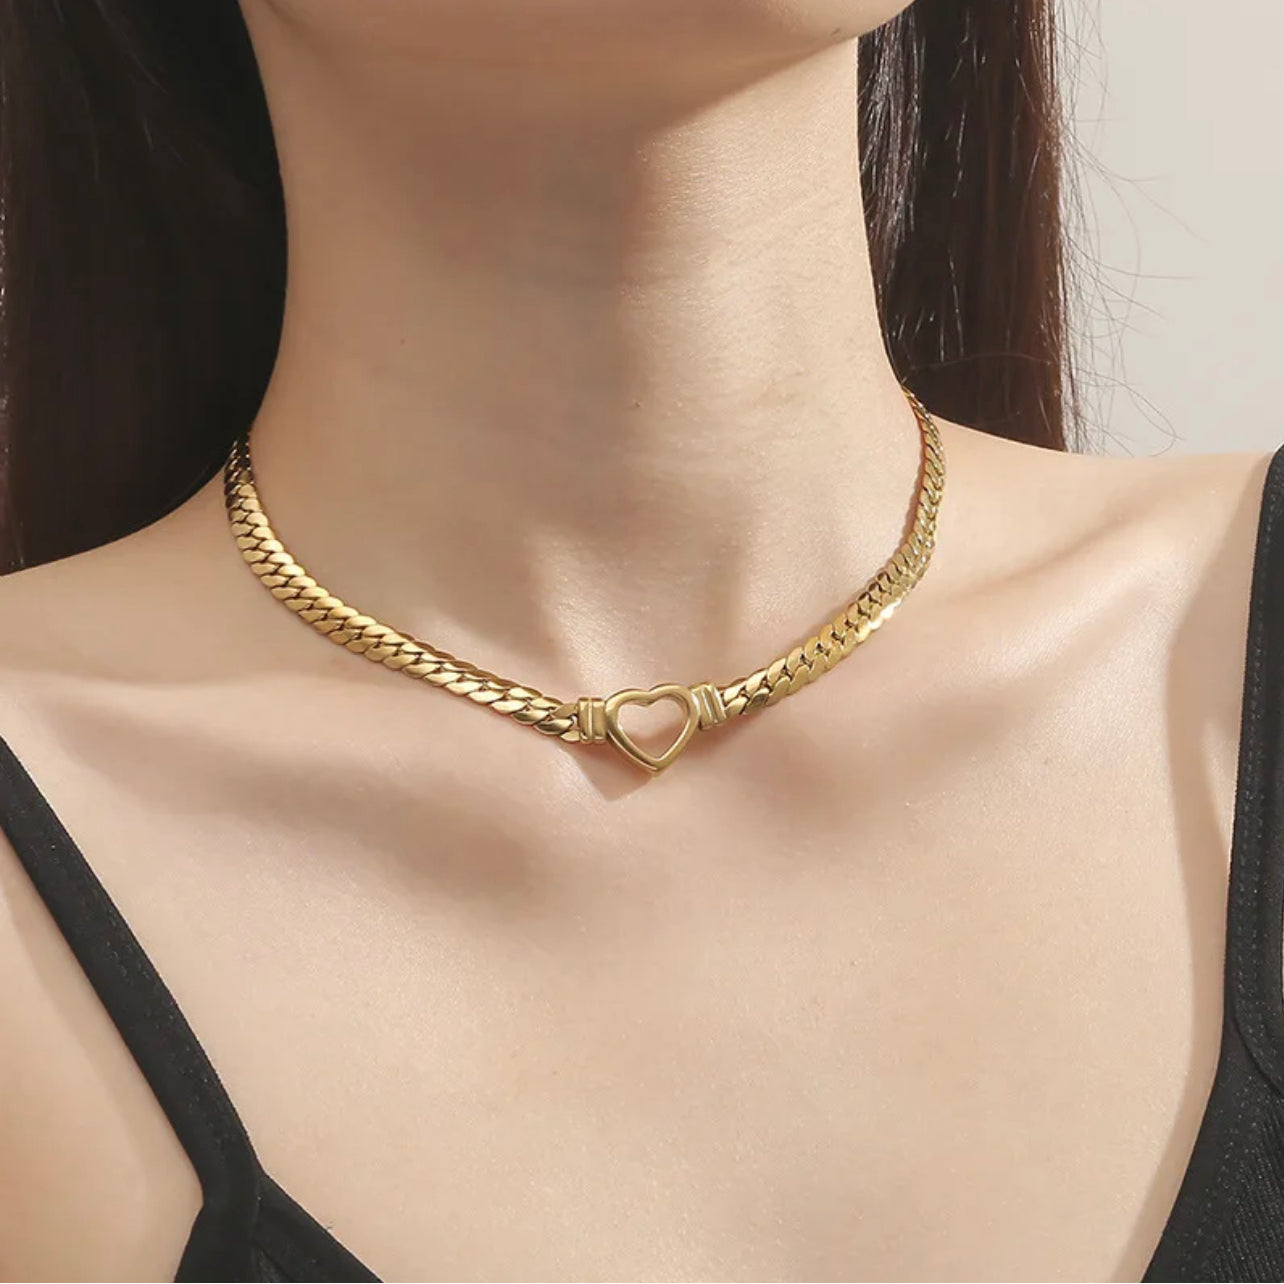 Retro heart Necklace -18k Gold Filled